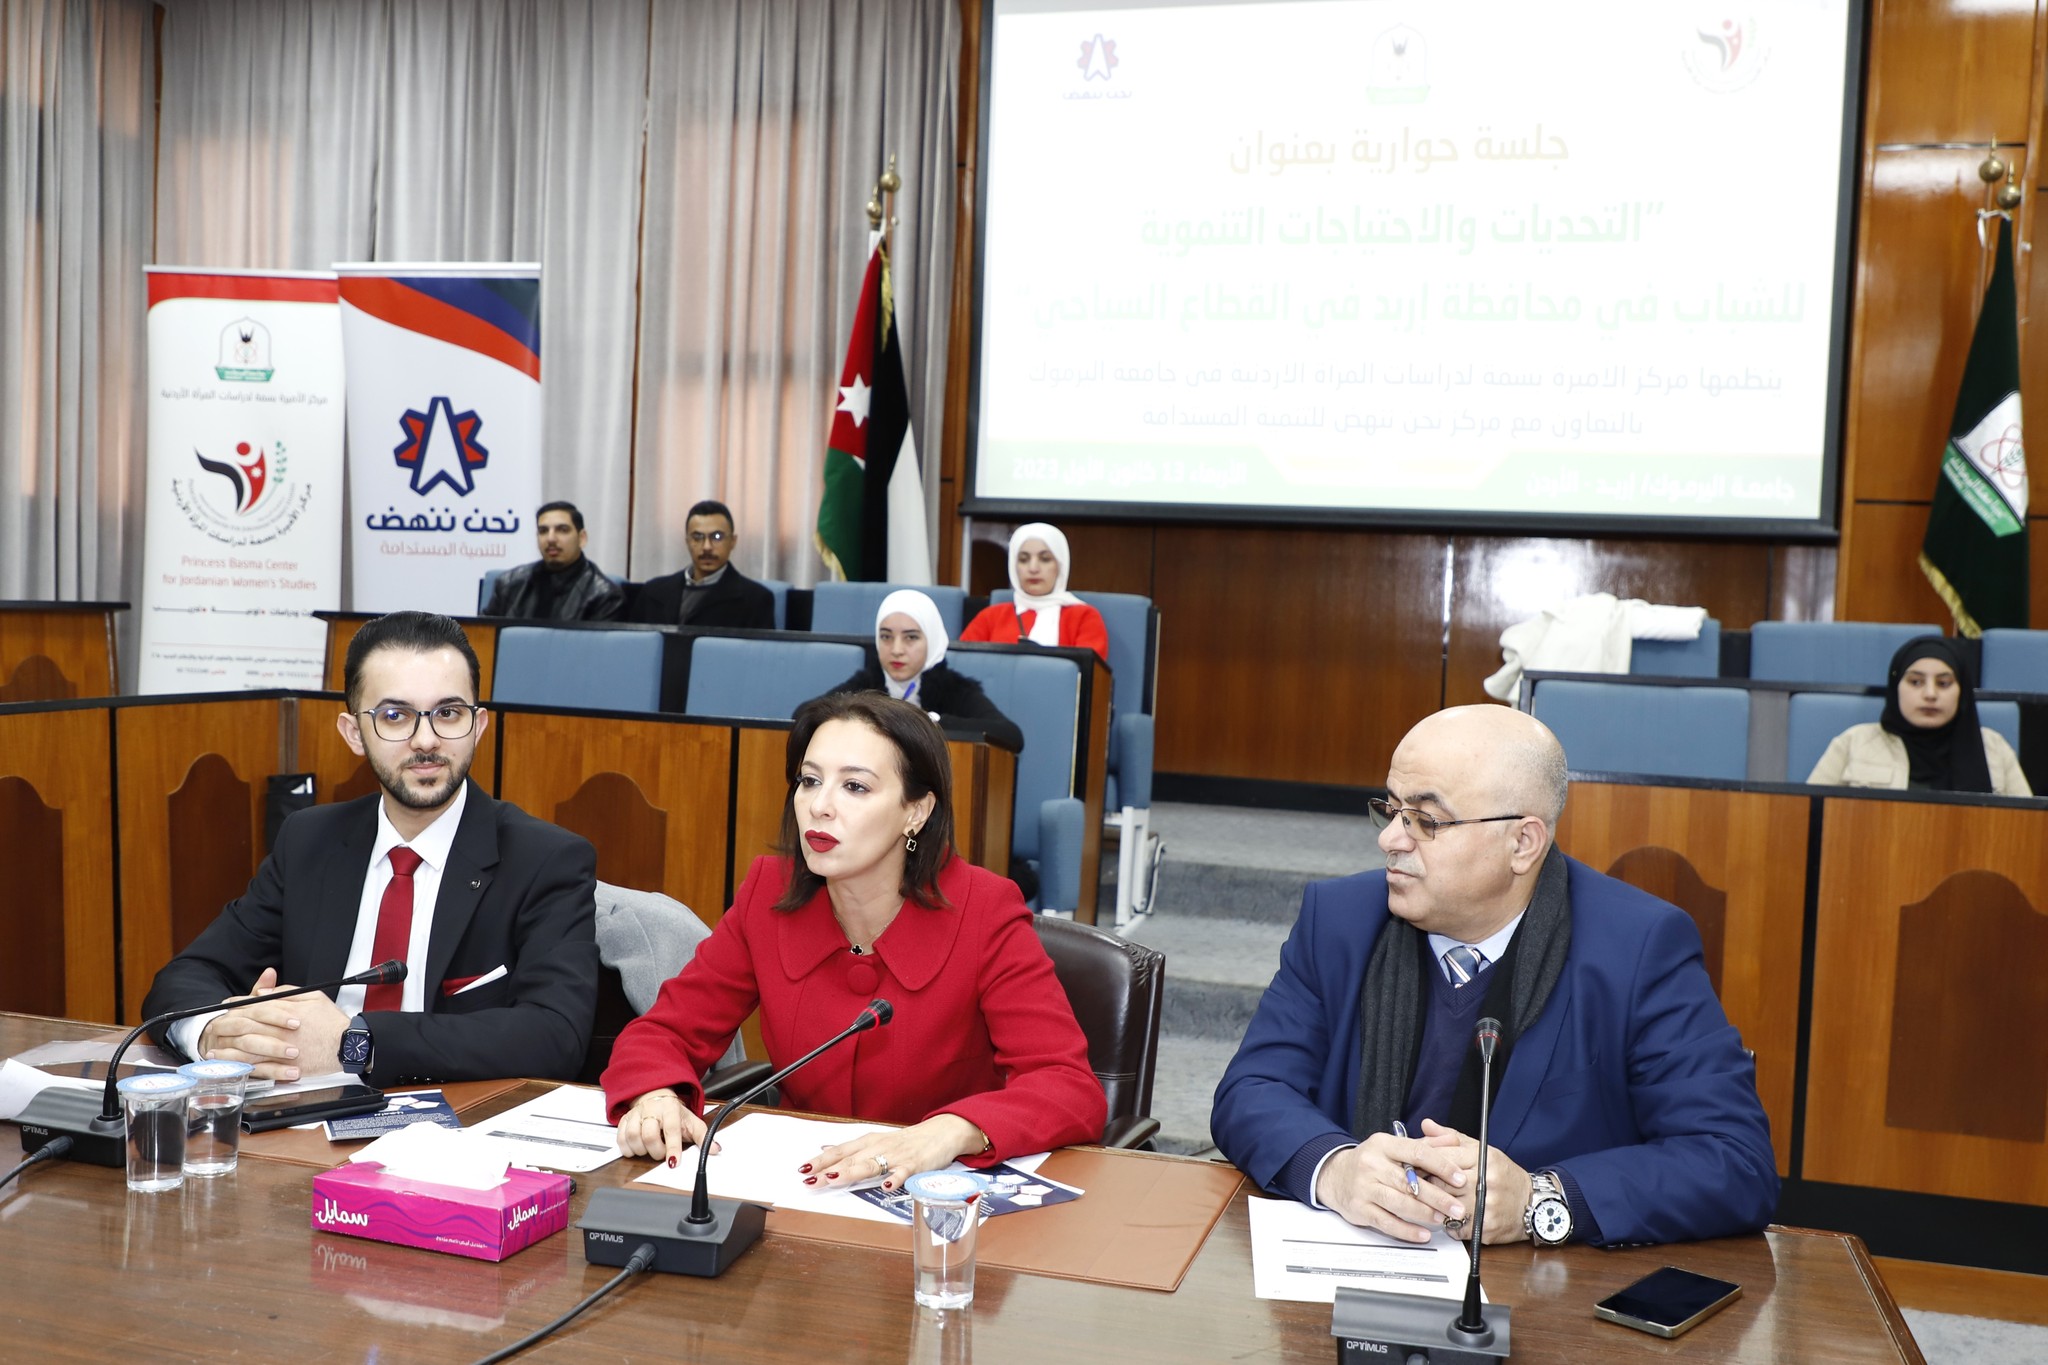 Dialogue in “Yarmouk” on “ChallengDialogue in “Yarmouk” on “Challenges and development needs of youth in Irbid Governorate in the tourism sector”es and development needs of youth in Irbid Governorate in the tourism sector”